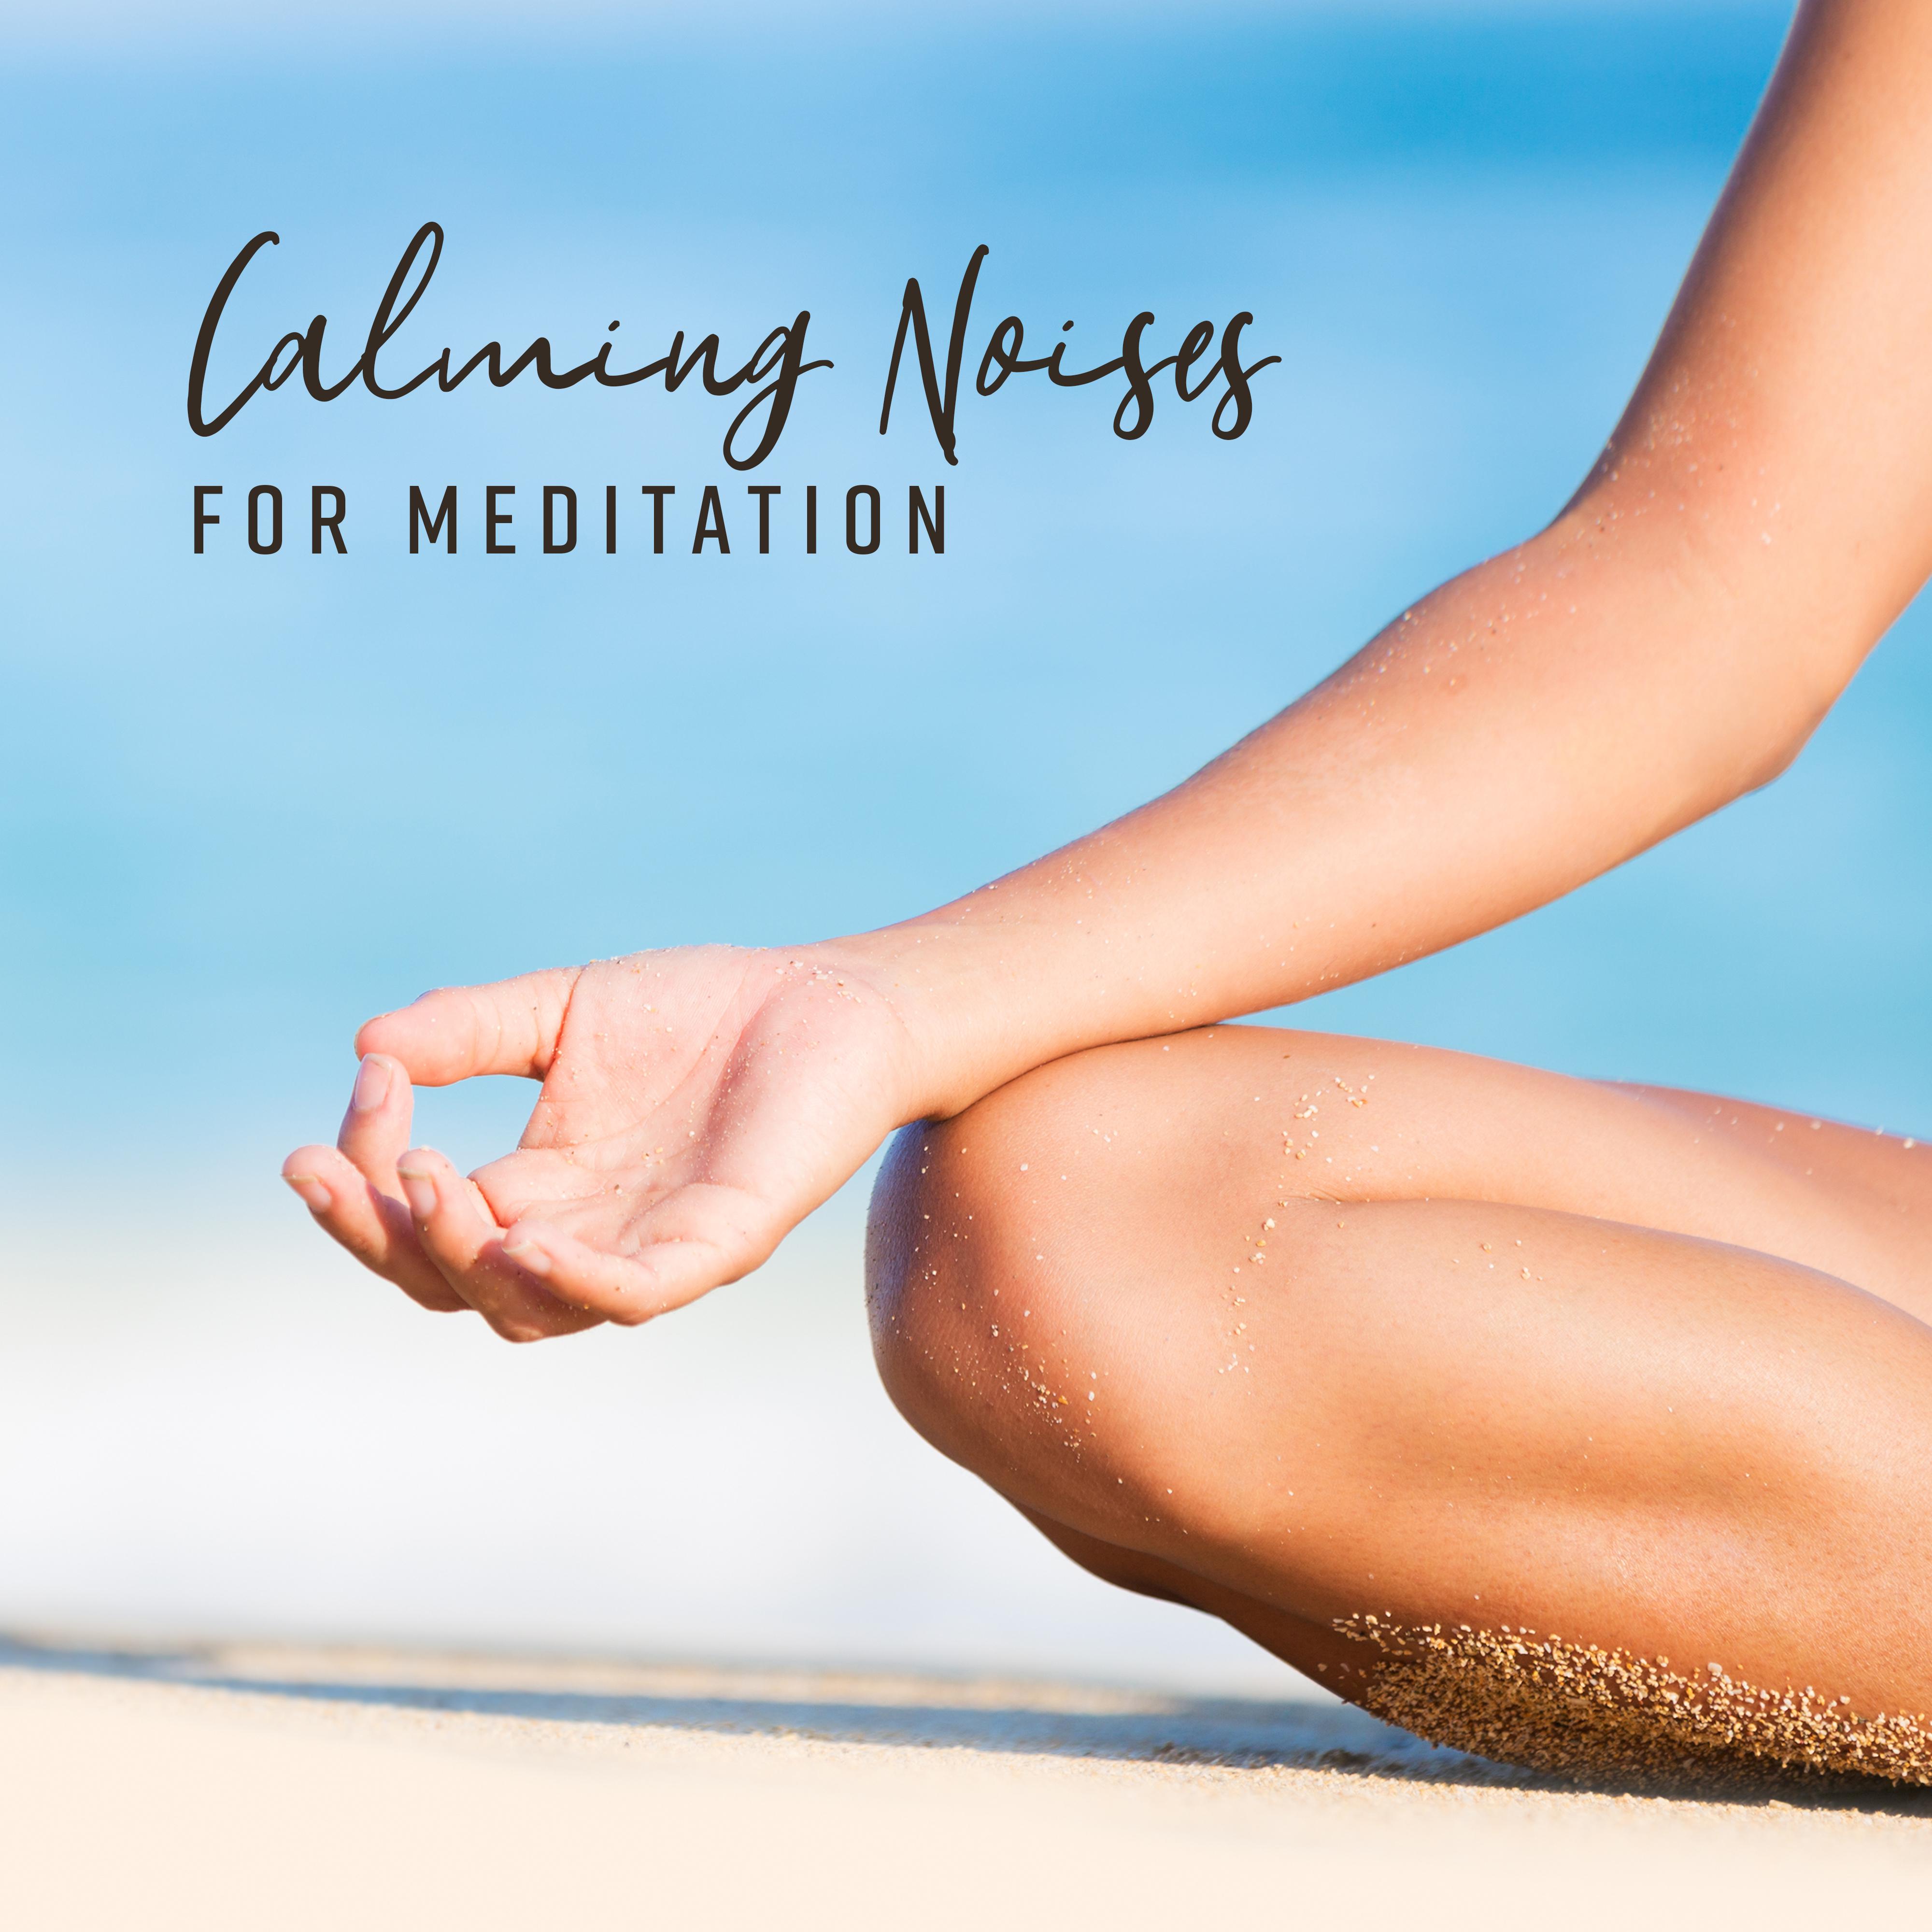 Calming Noises for Meditation  Yoga Practice, Chakra Healing Music, Yoga Meditation, Asian Relaxation Therapy, Mindfulness Training